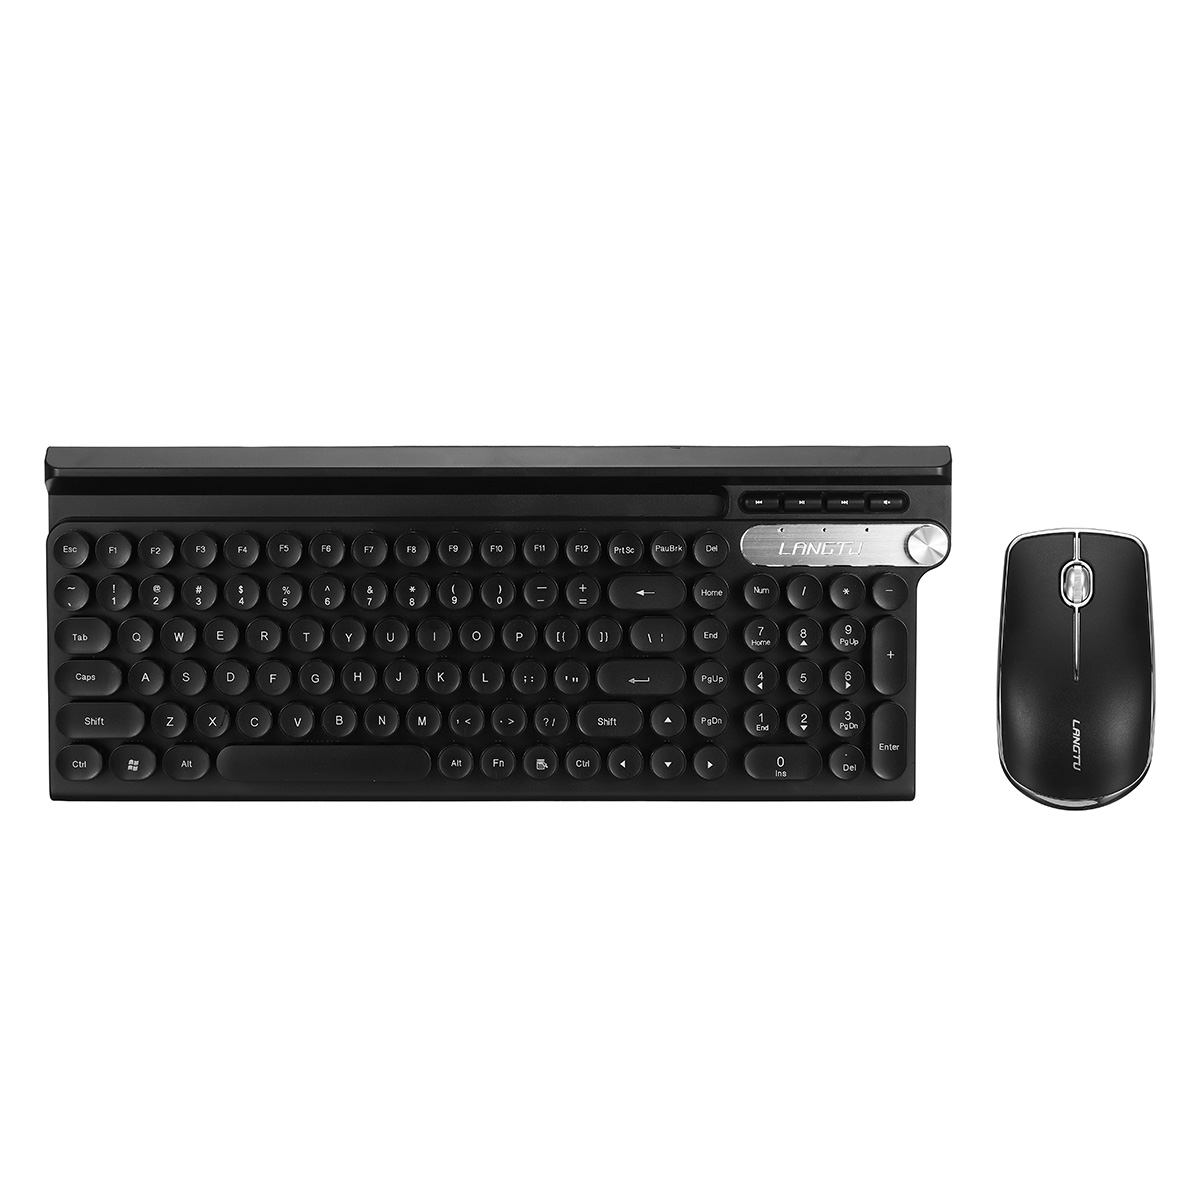 

LT500 3 Color Rechargeable 2.4G Wireless Ultra-thin Keyboard and 1500 Ultra-thin Office Mouse Combo for PC Laptop